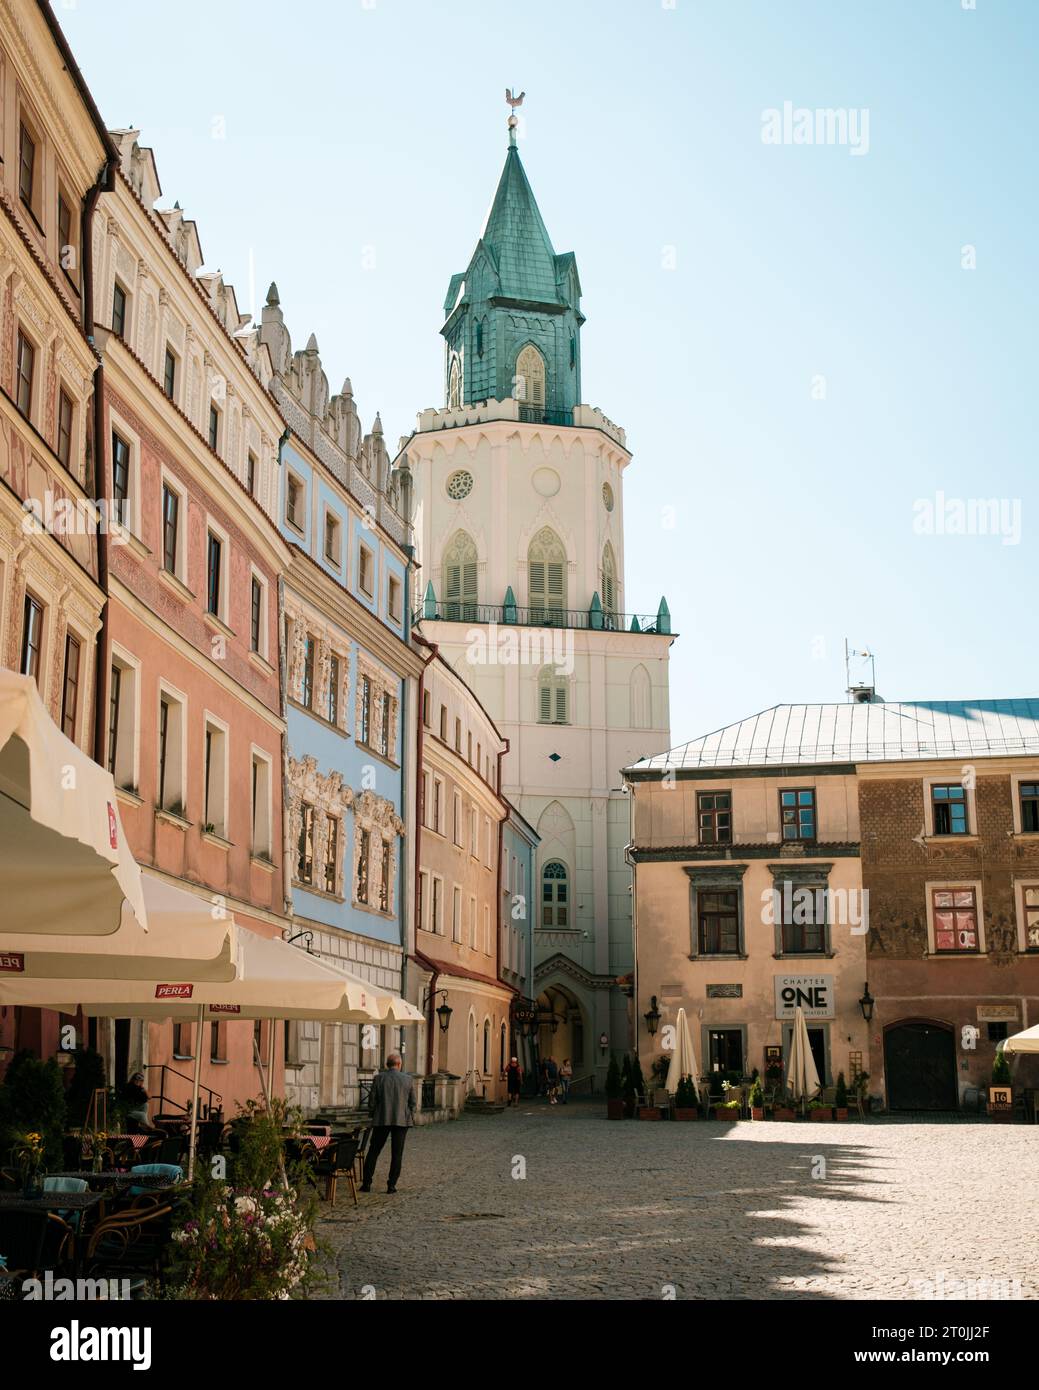 Trinity Tower in the Old Town of Lublin, Poland Stock Photo